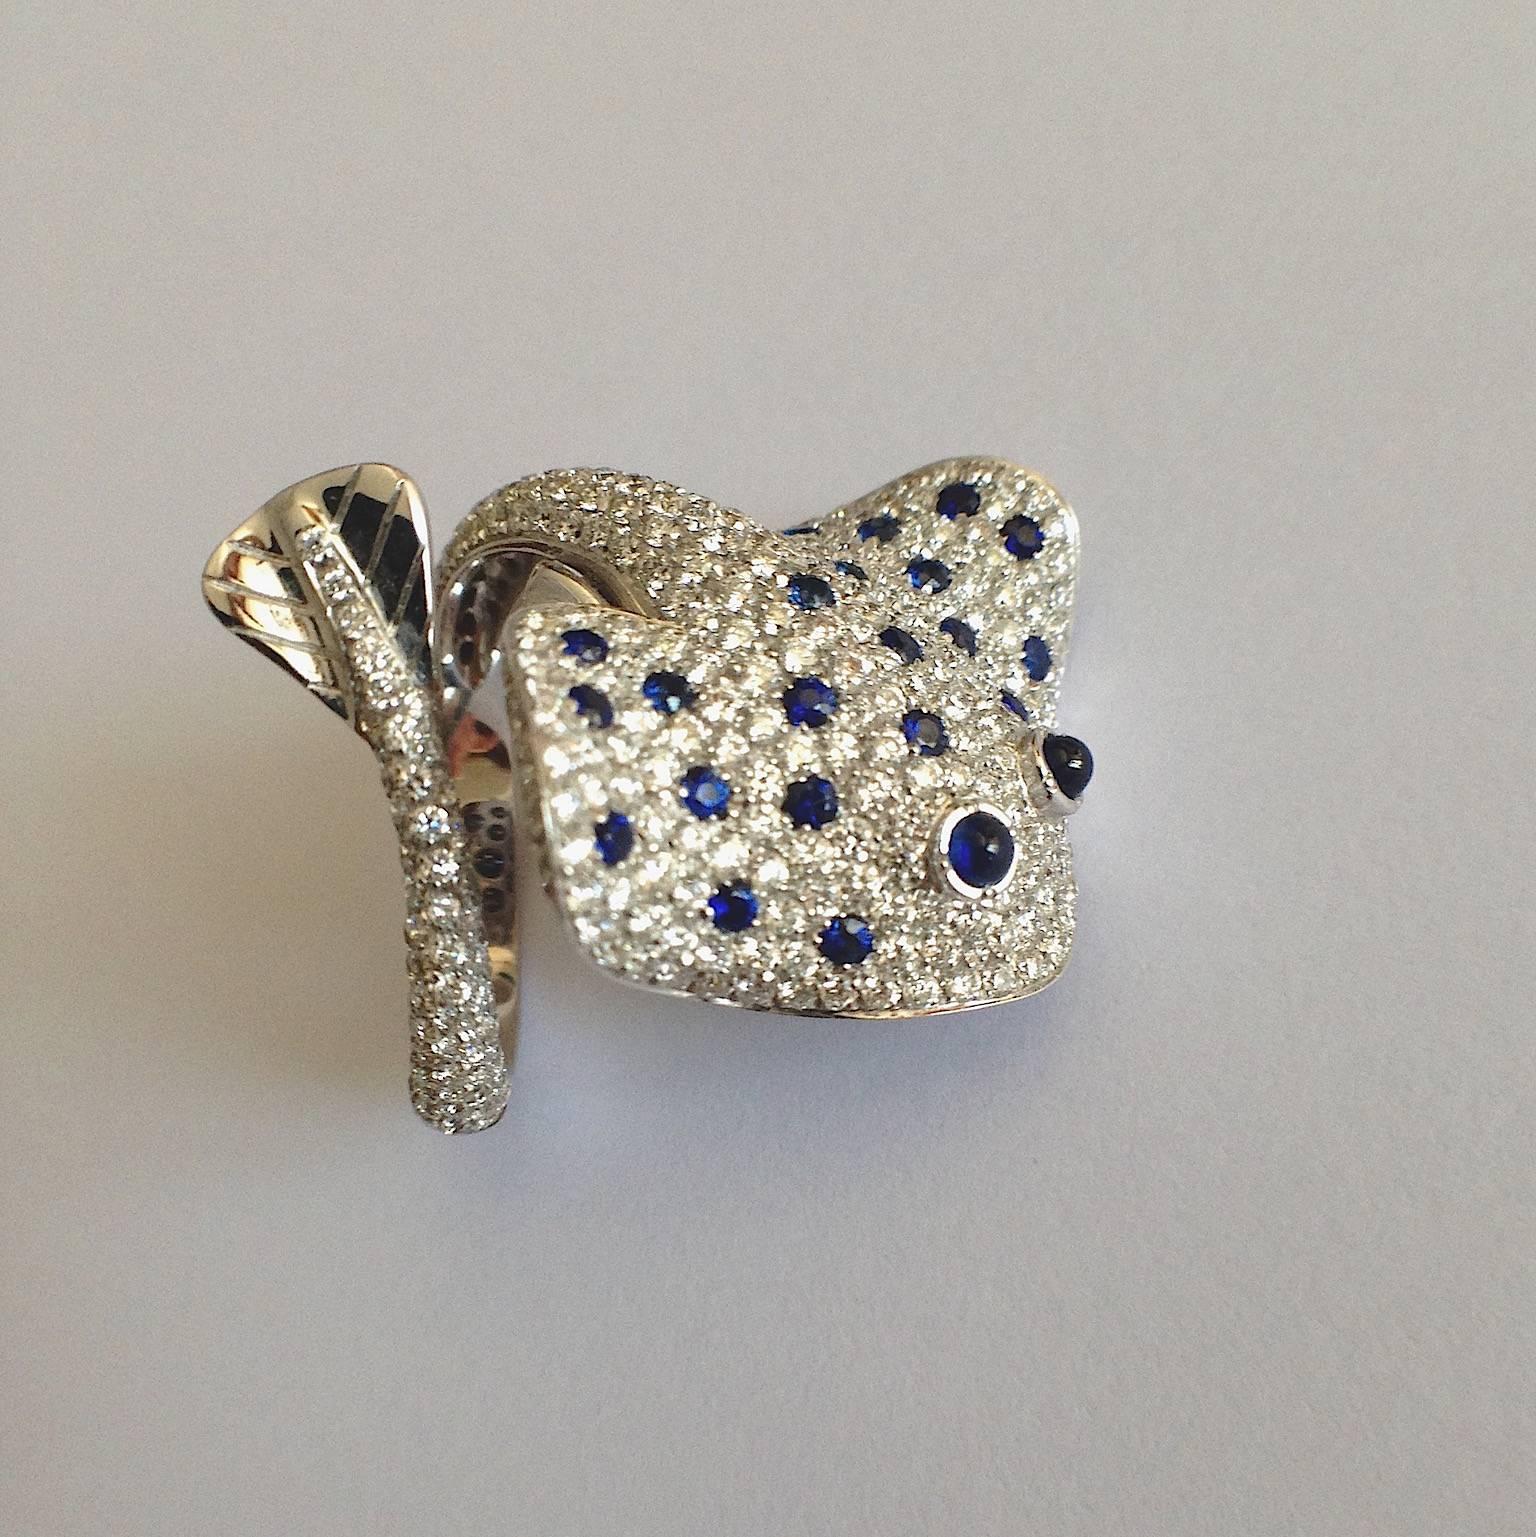 Petronilla Ray Fish Blue Sapphire White Diamond 18Kt Gold Ring Made in Italy 2